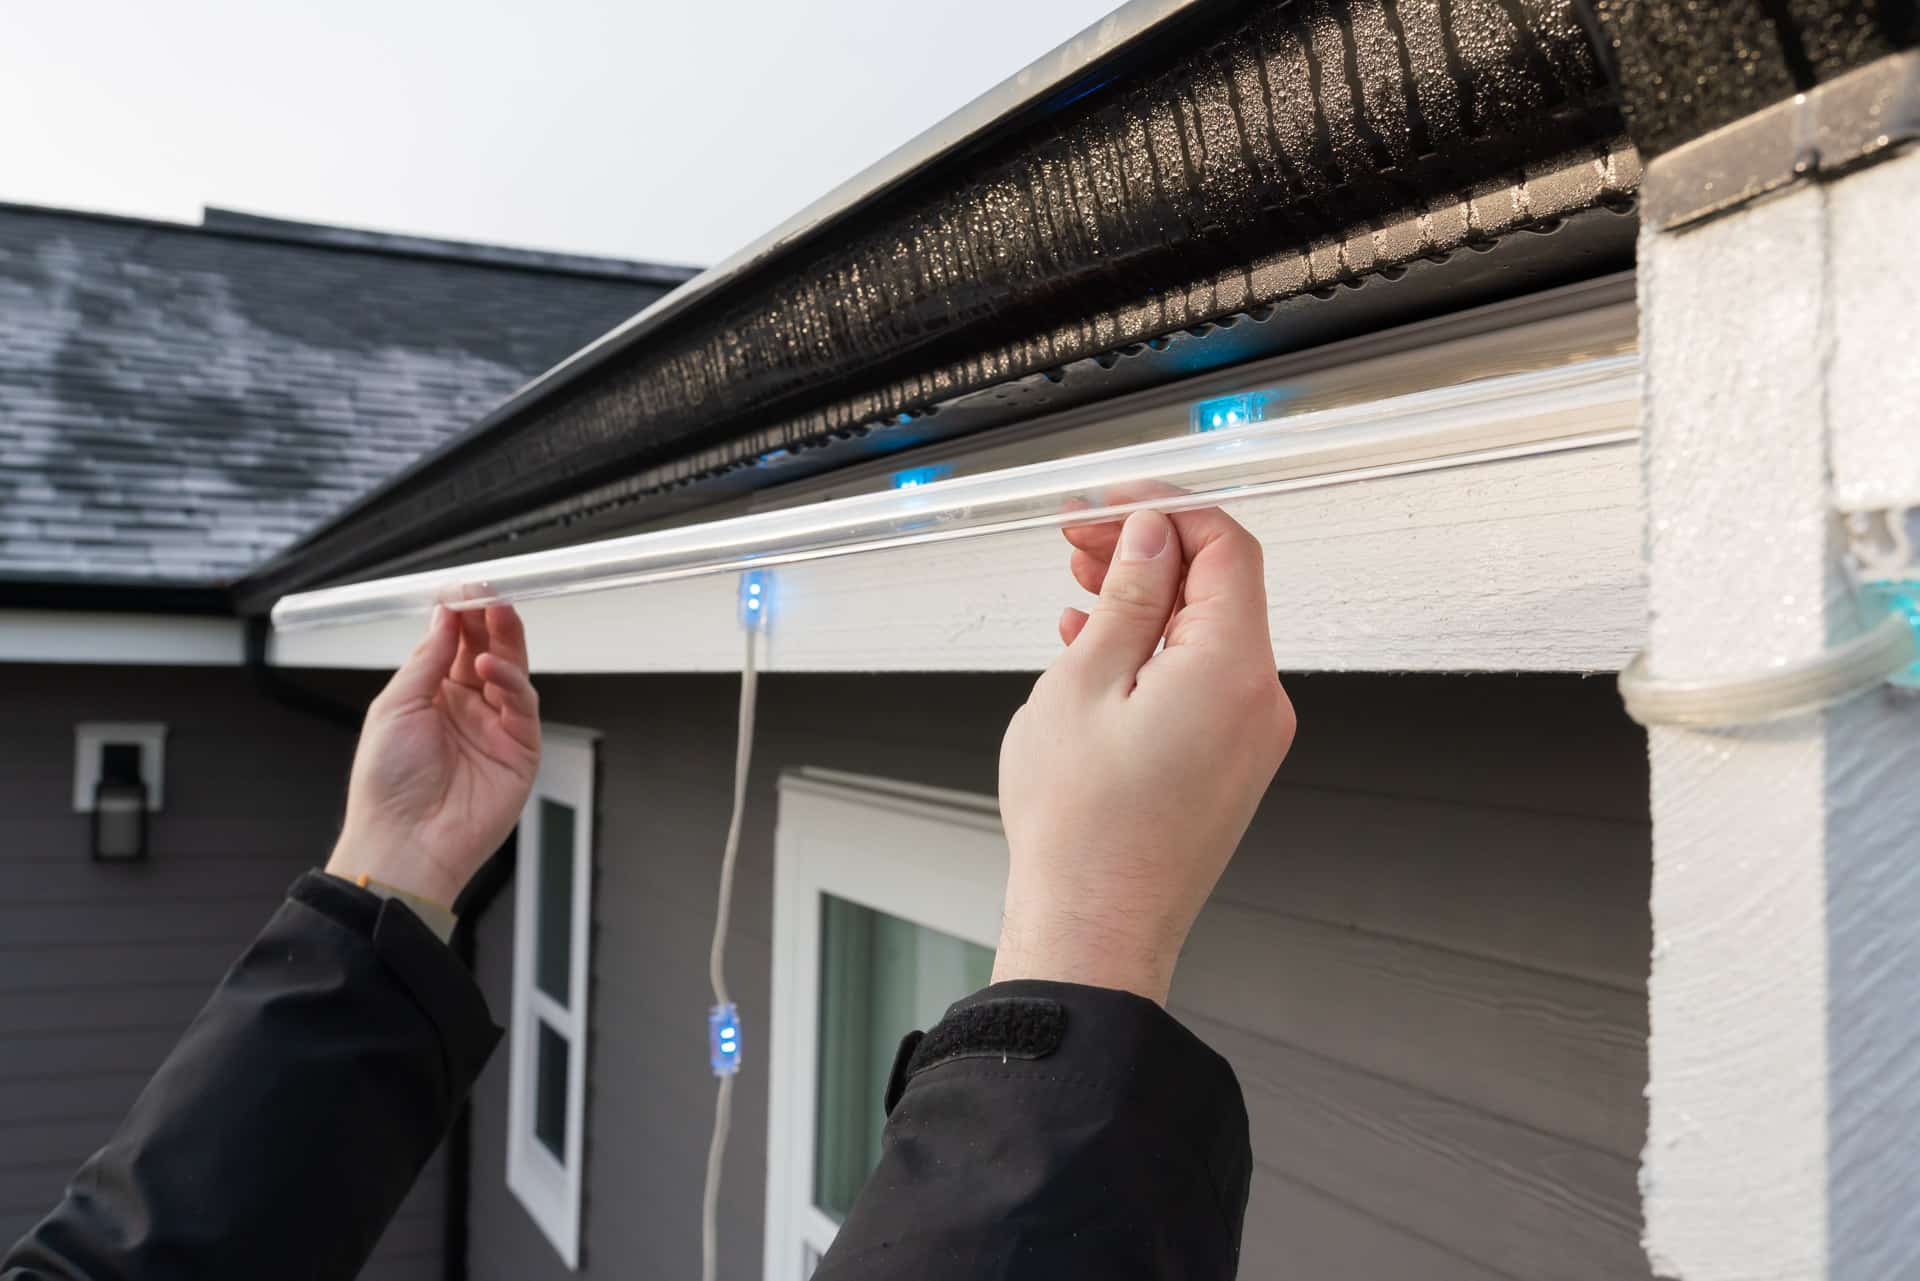 An installer puts up permanent outdoor lighting strips for a house